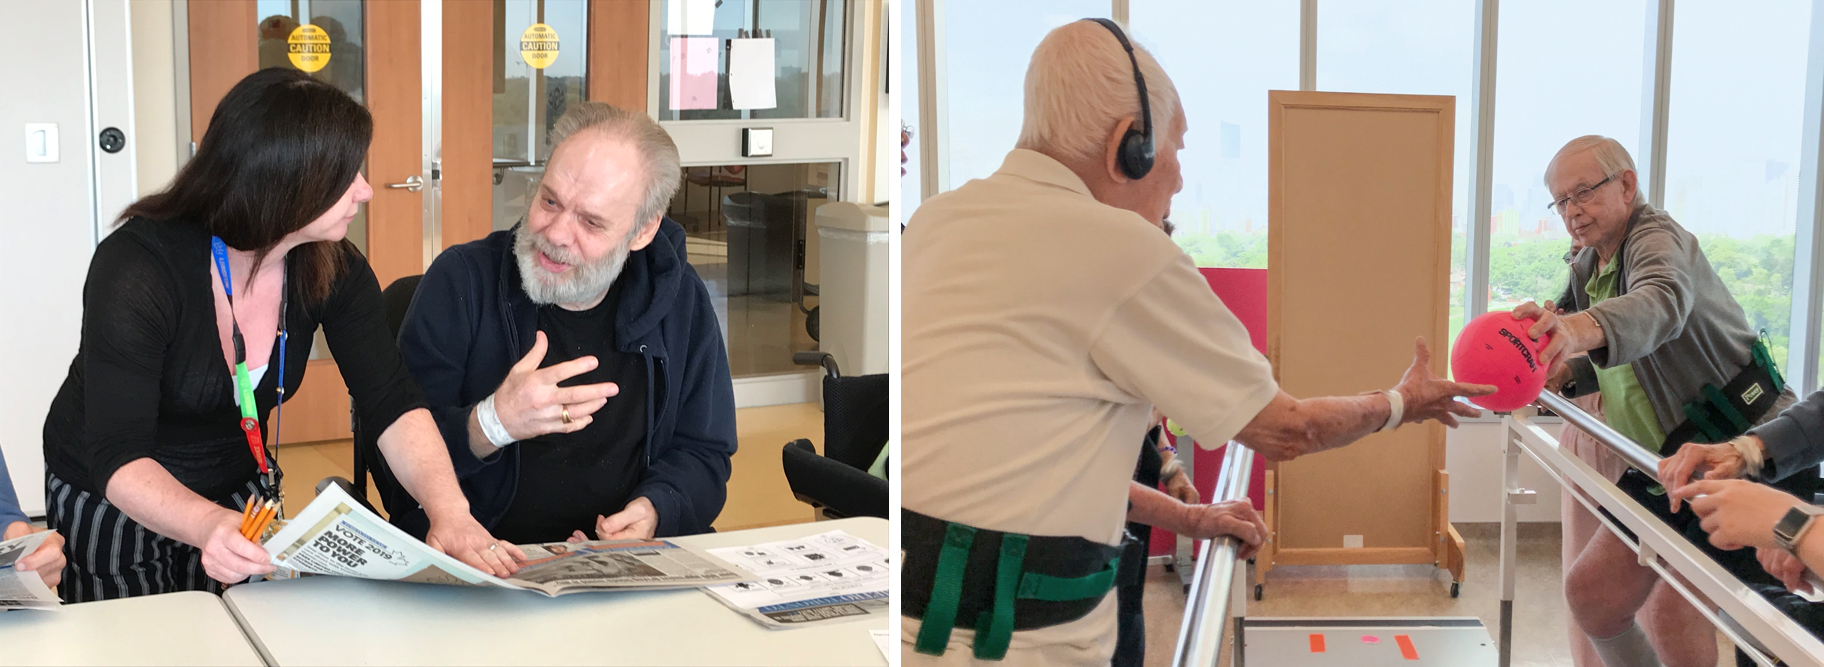 Two separate photos next to each other. One shows a patient and member of the clinical team at a table discussing a newspaper. The second photo shows an exercise class where two patients are standing holding onto railings and passing a ball to each other.